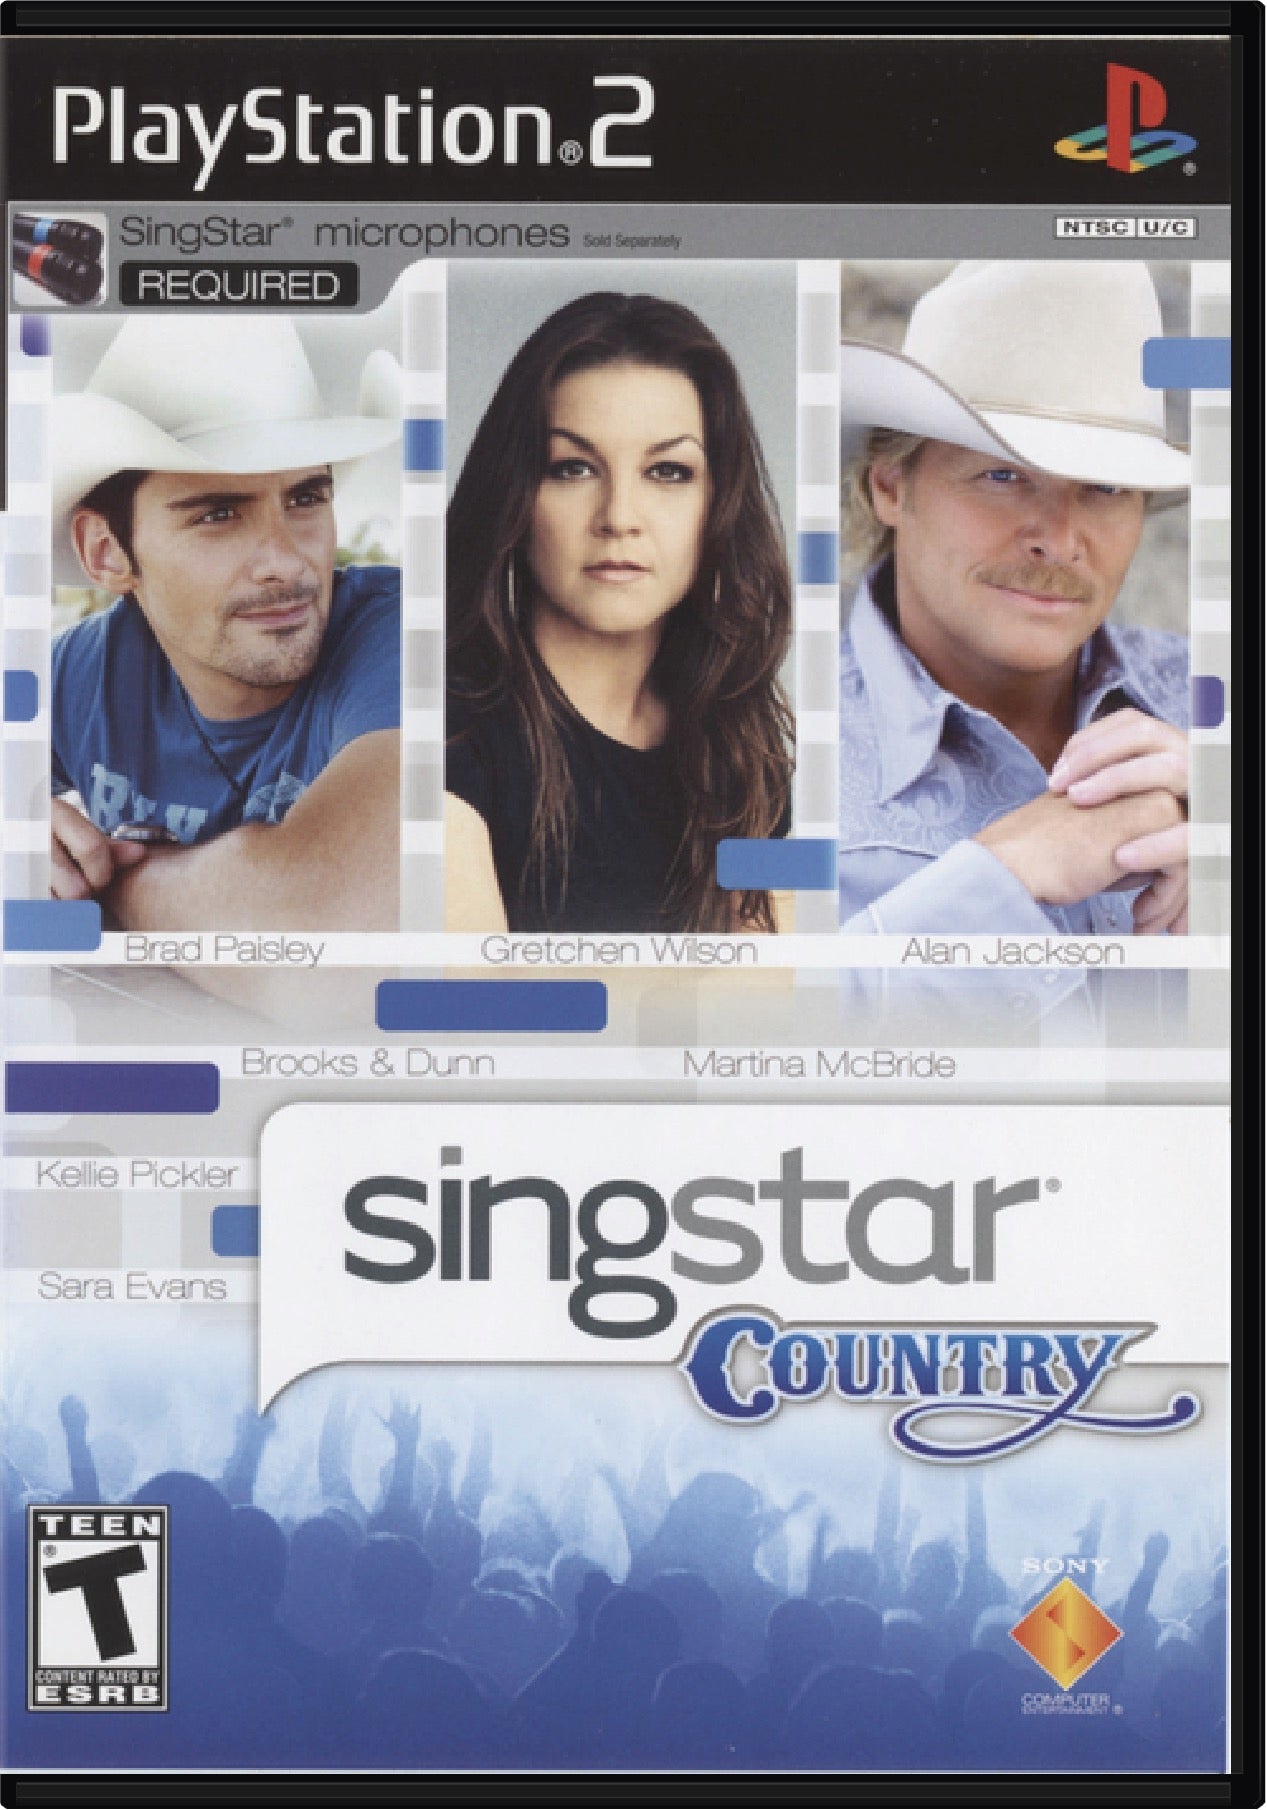 SingStar Country Cover Art and Product Photo